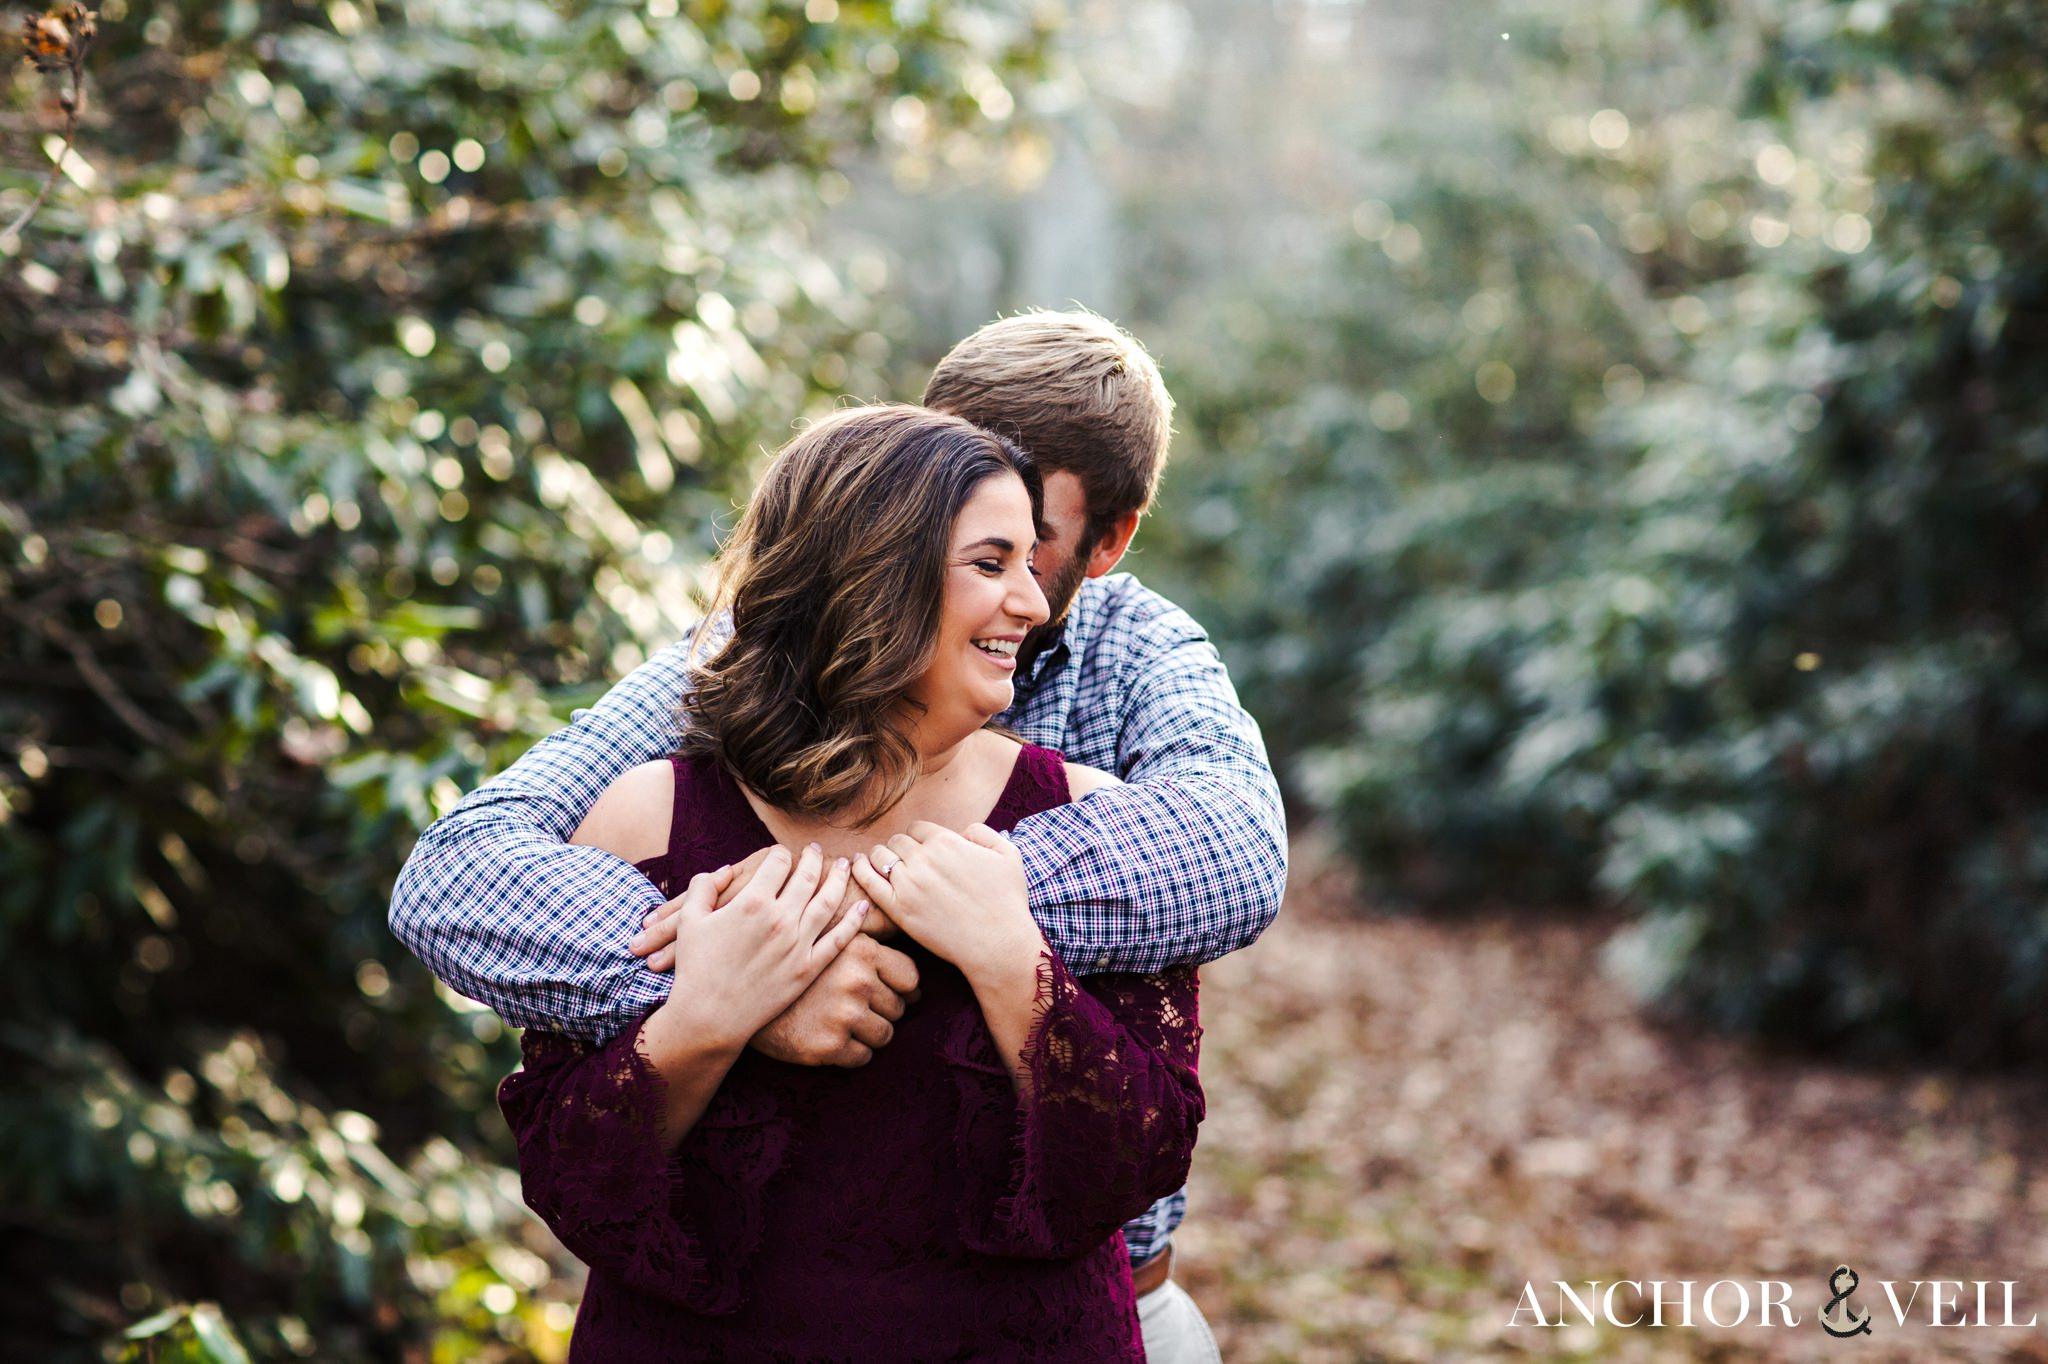 holding her from behind during the engagement Session